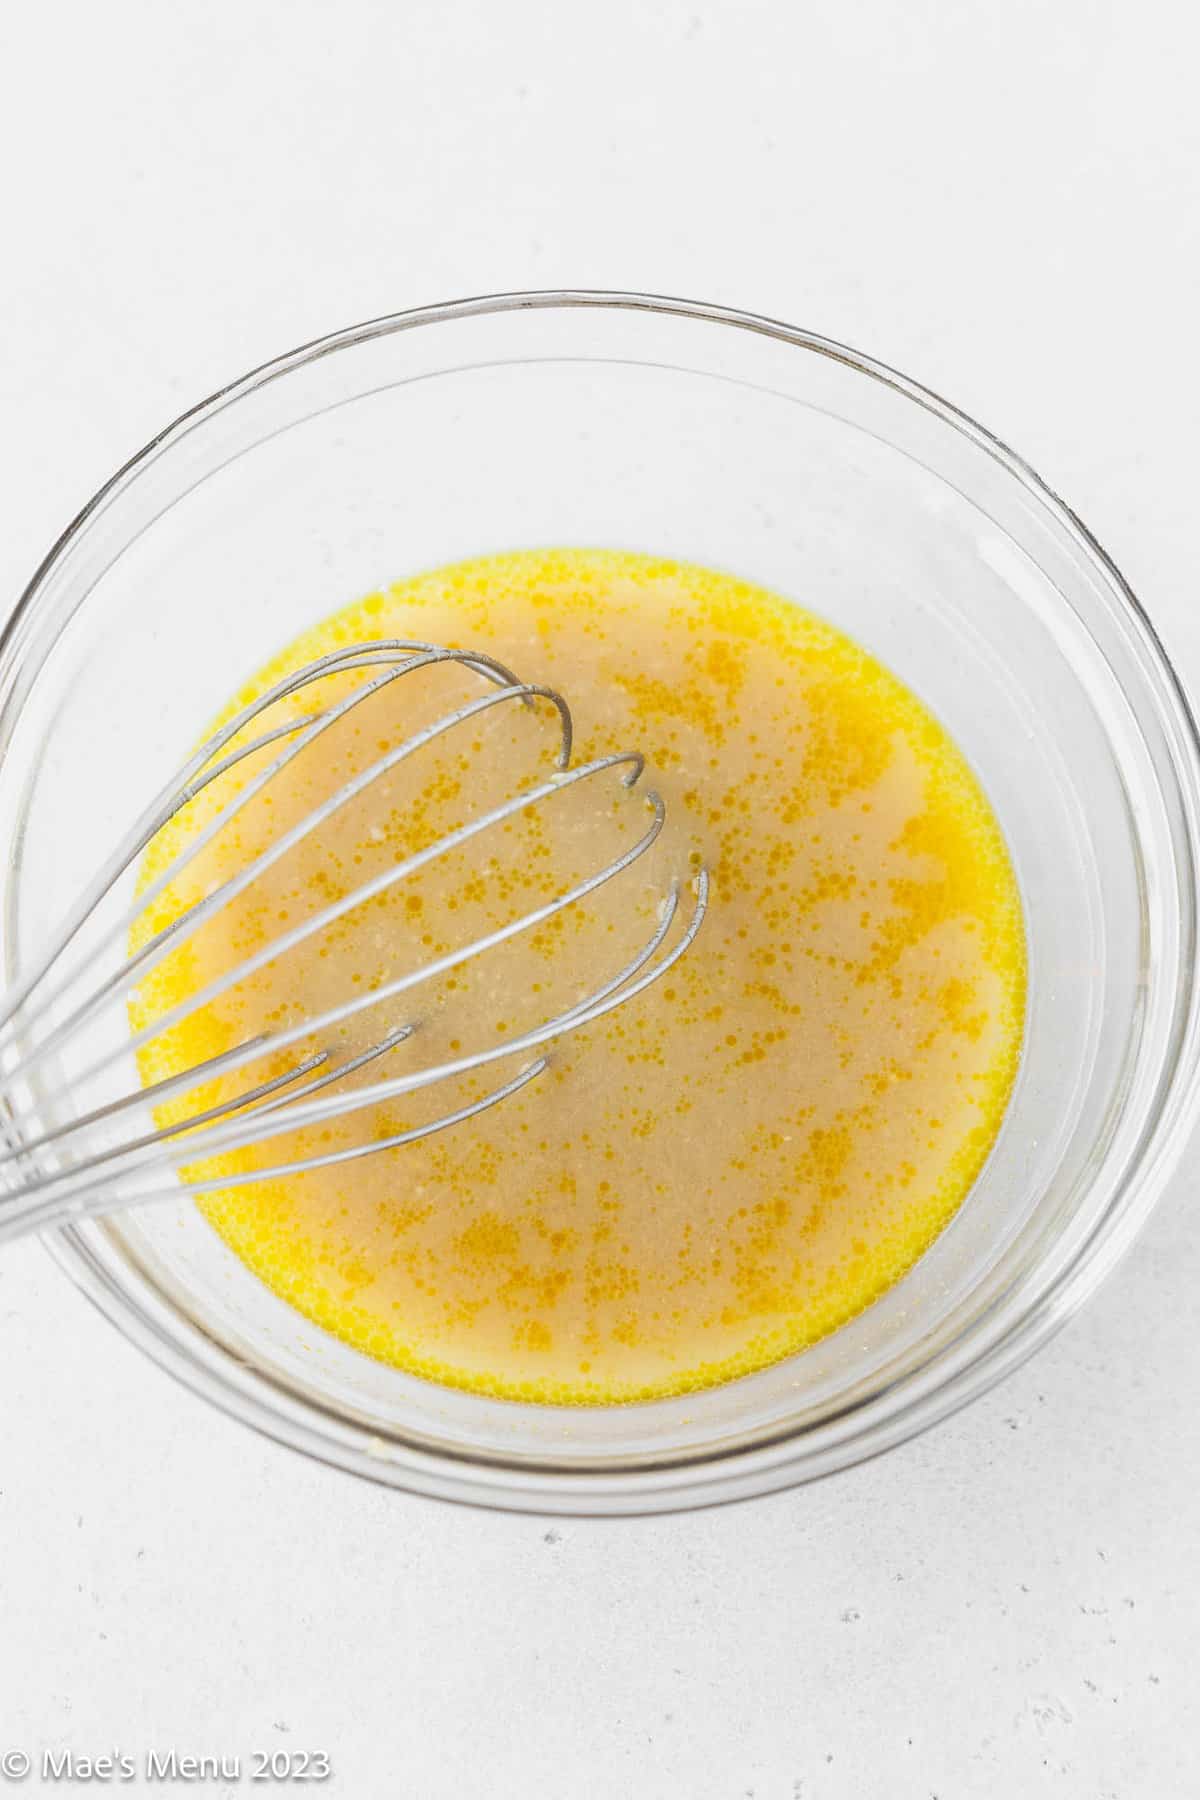 Whisking the miso and water together in a clear bowl on a white background.